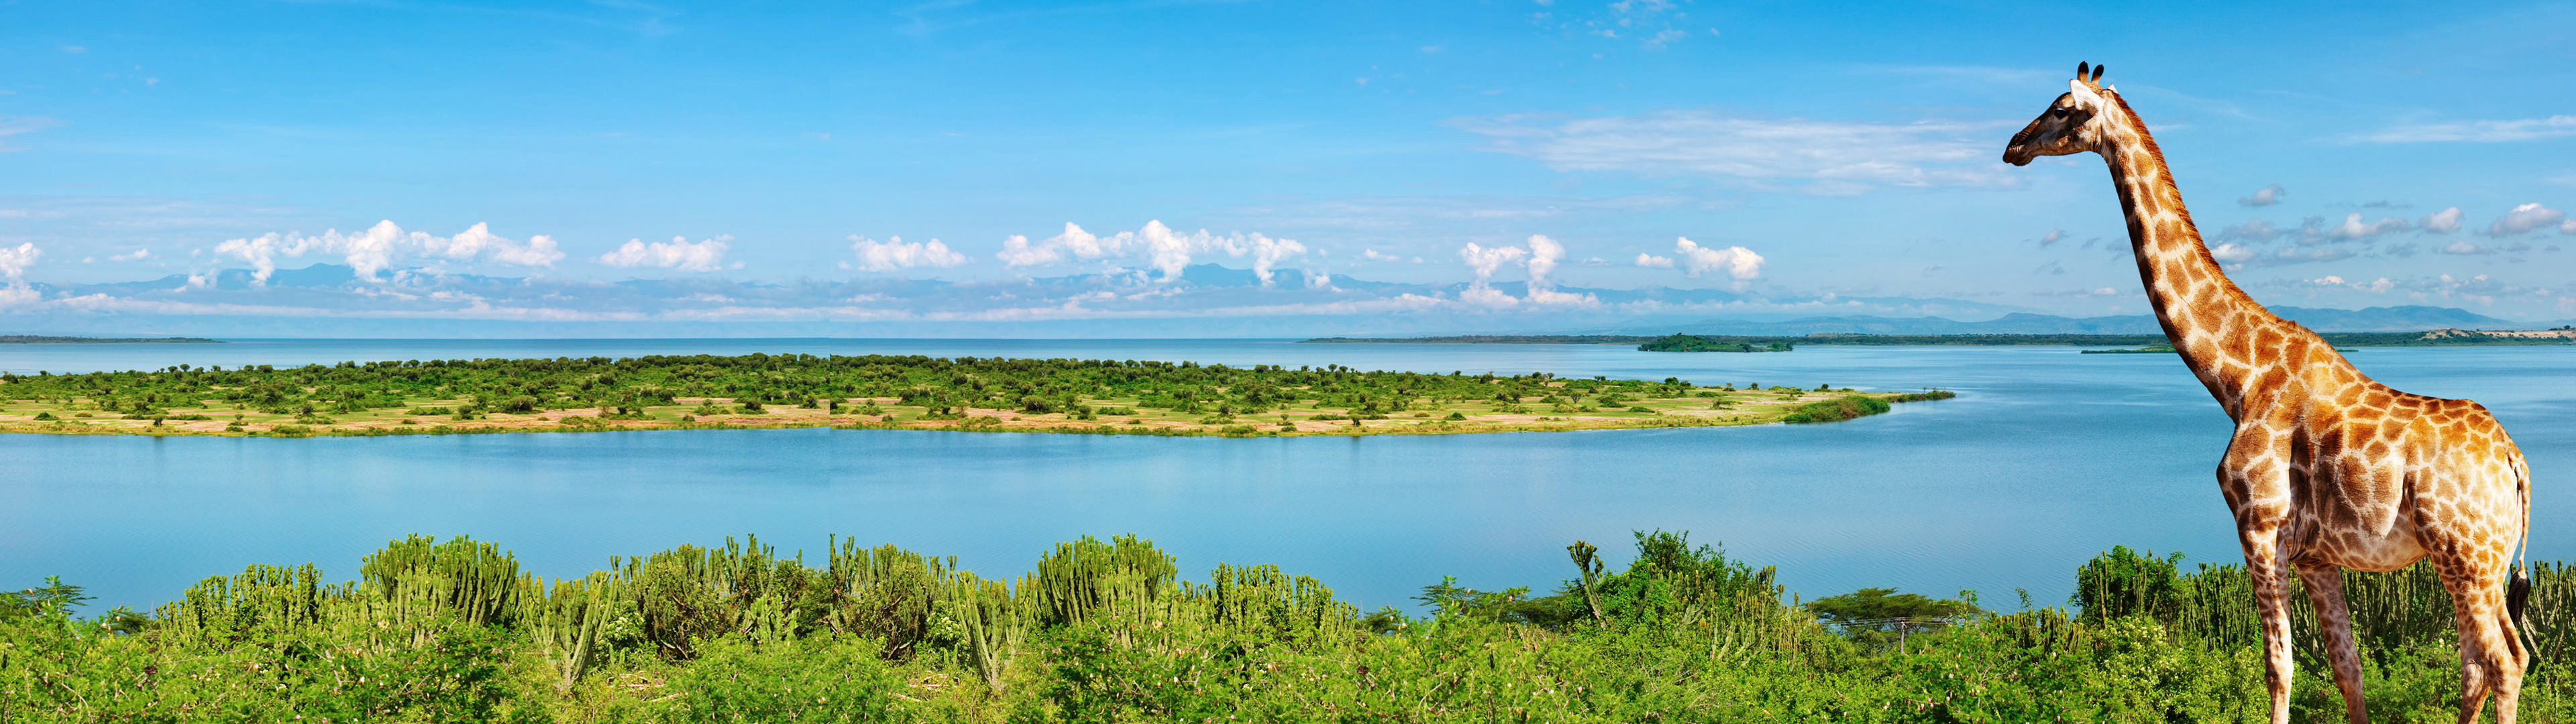 3840x1080 Download Africa [ 3840 x 1080 ...